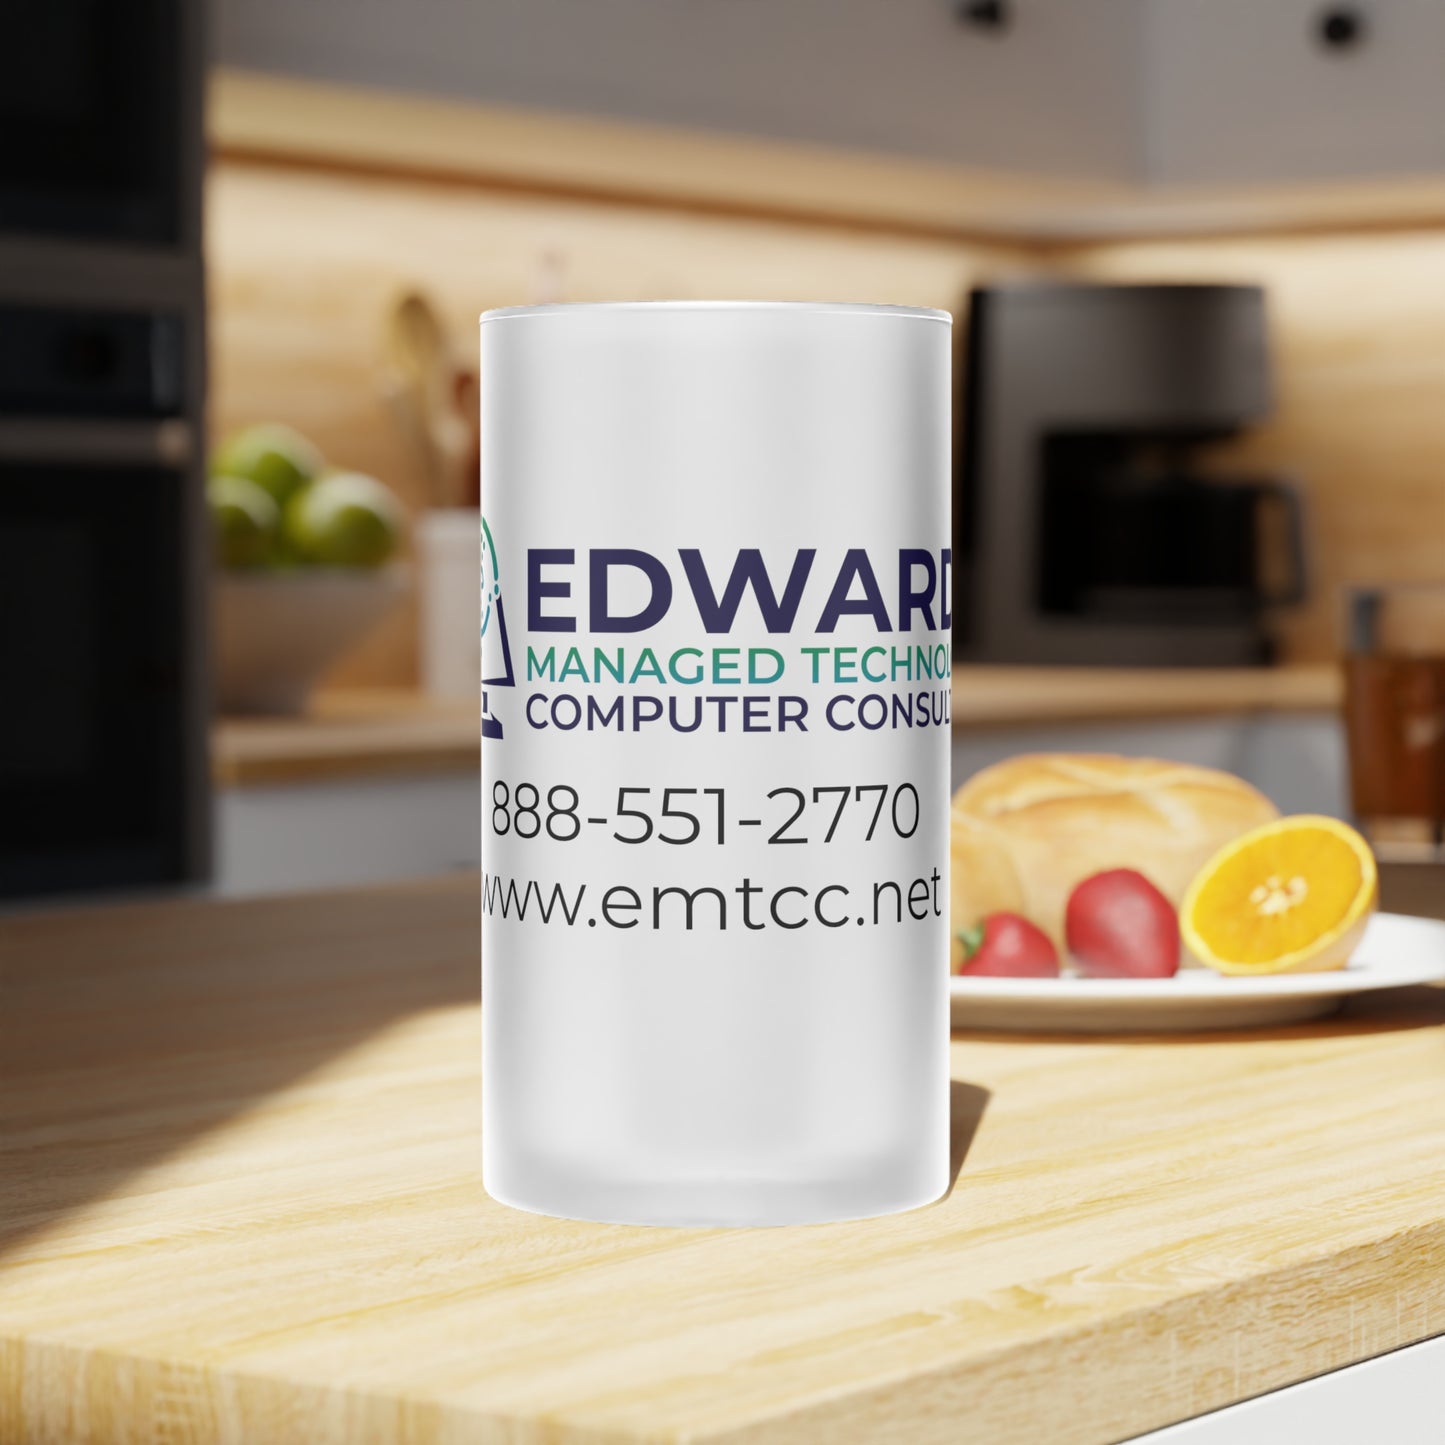 Edwards Managed Technology Computer Consulting Frosted Glass Beer Mug